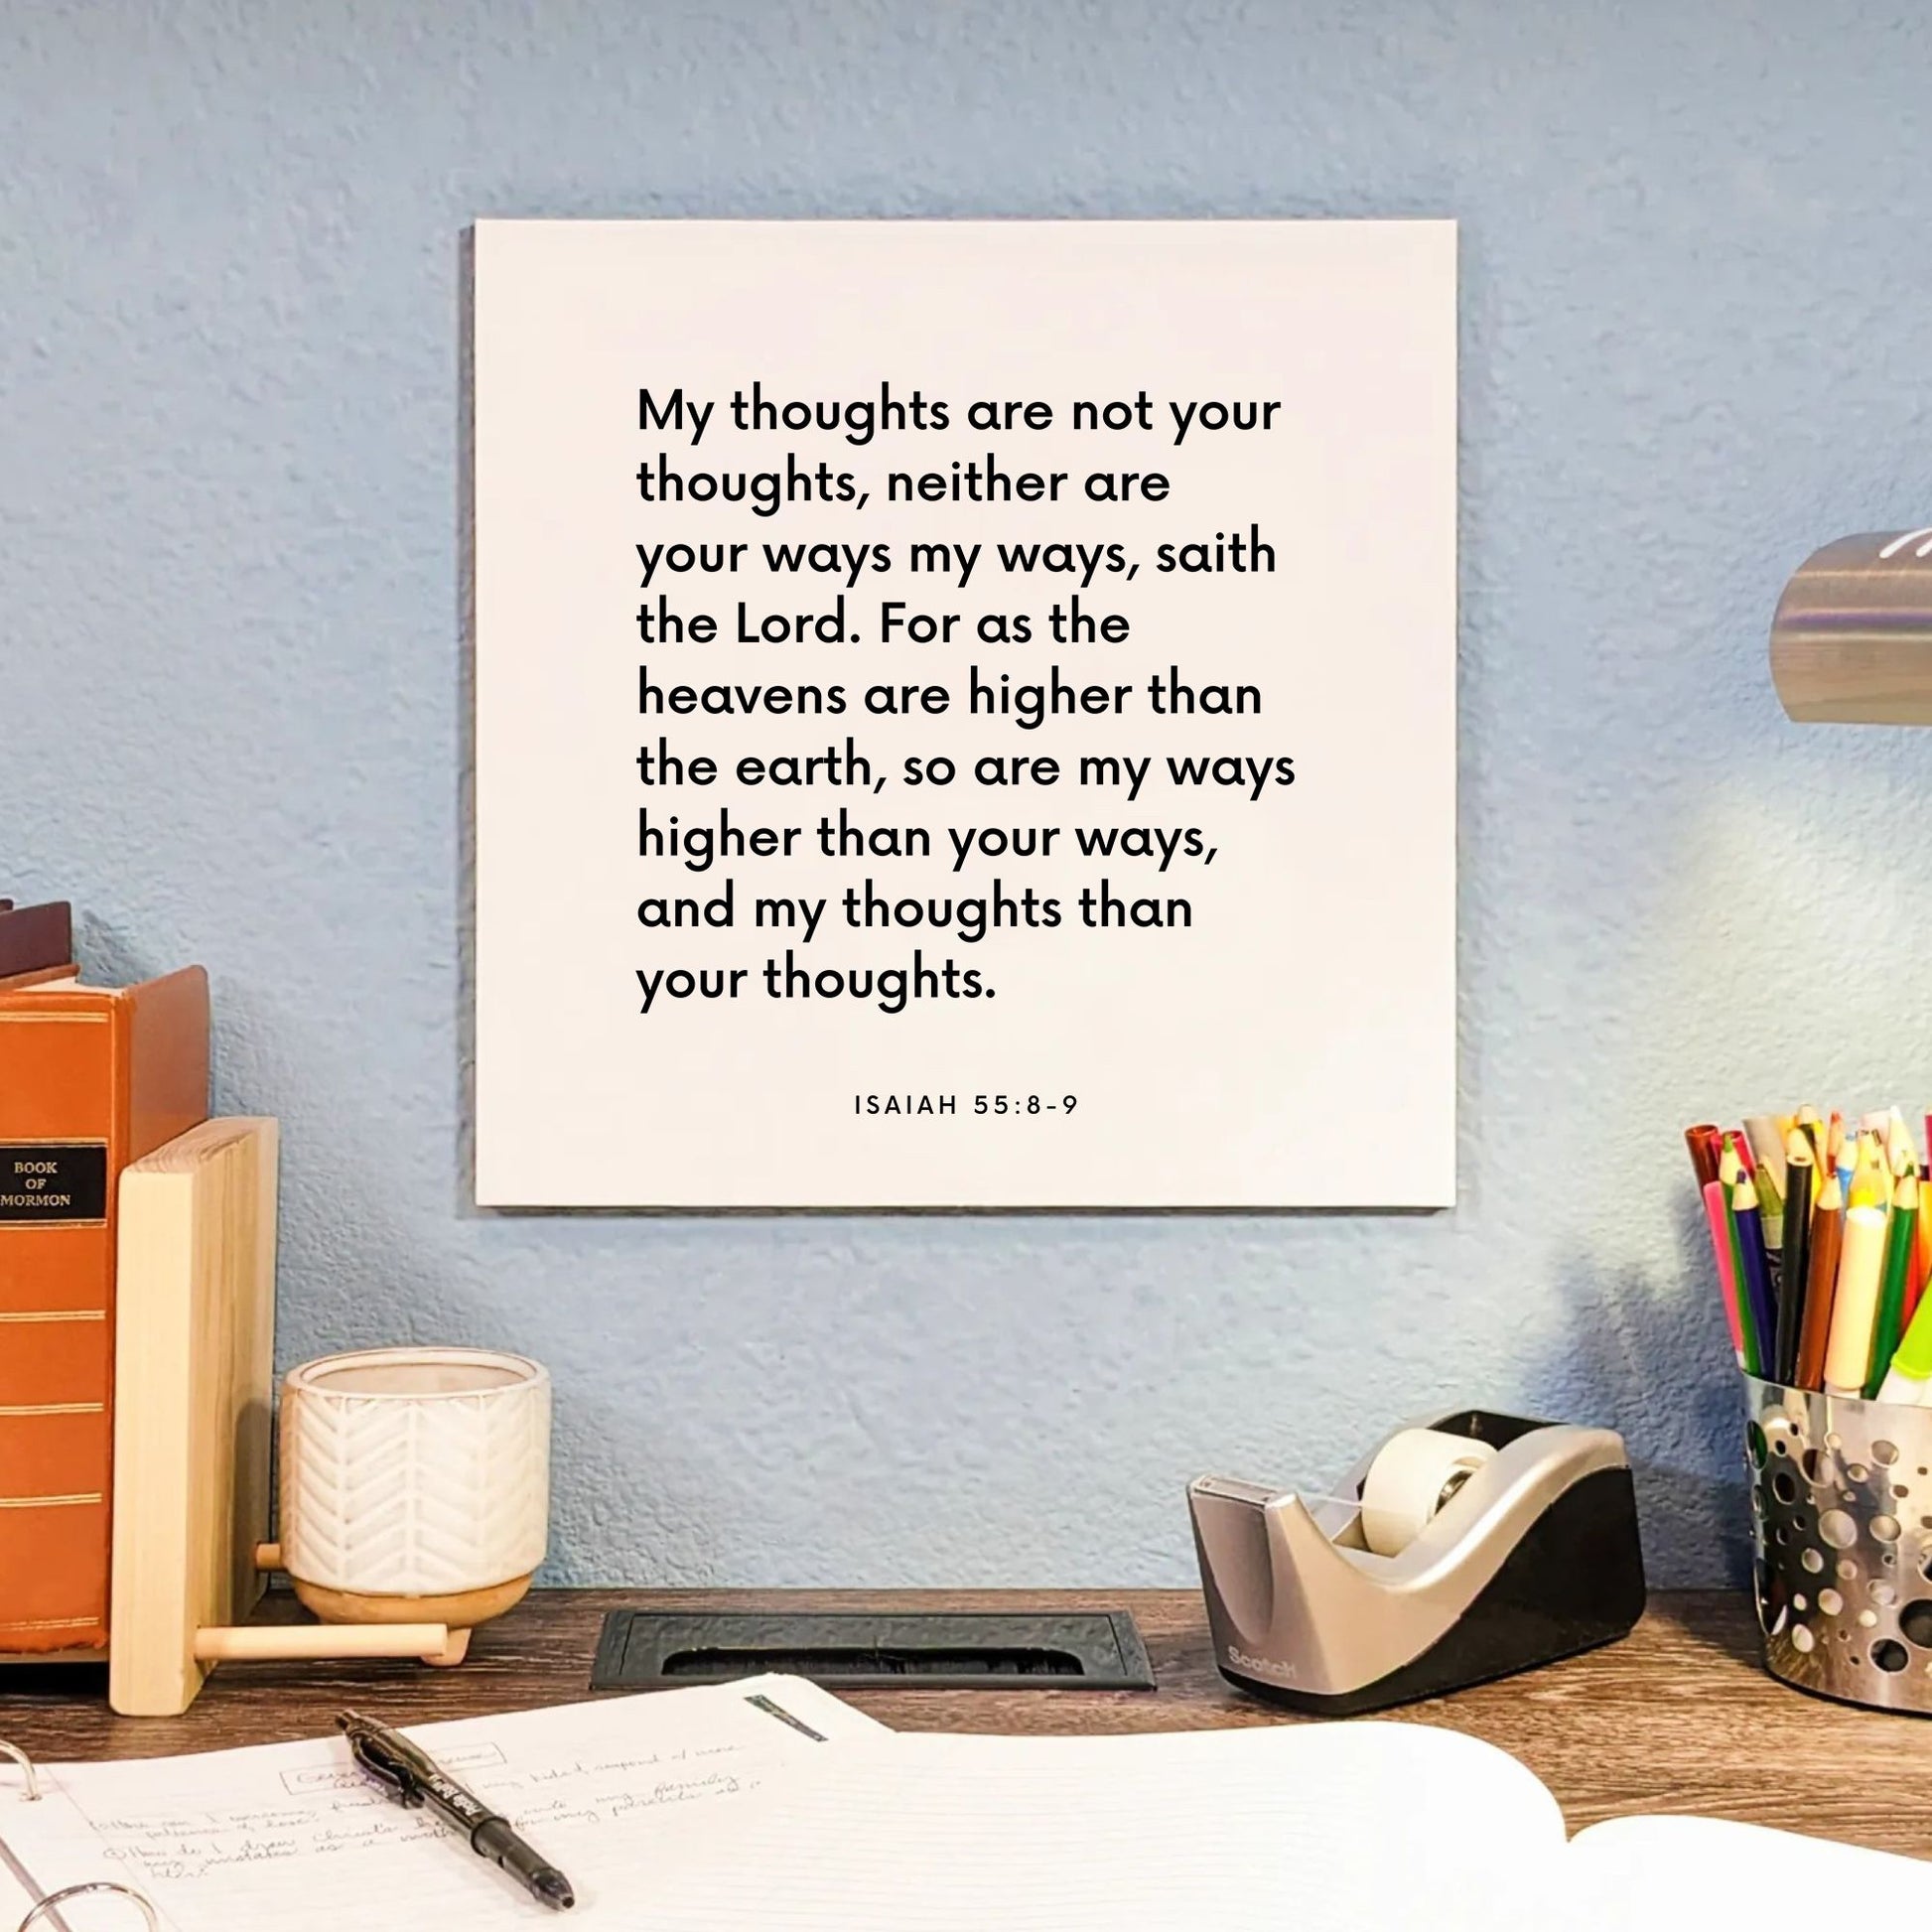 Desk mouting of the scripture tile for Isaiah 55:8-9 - "My thoughts are not your thoughts, neither your ways my ways"